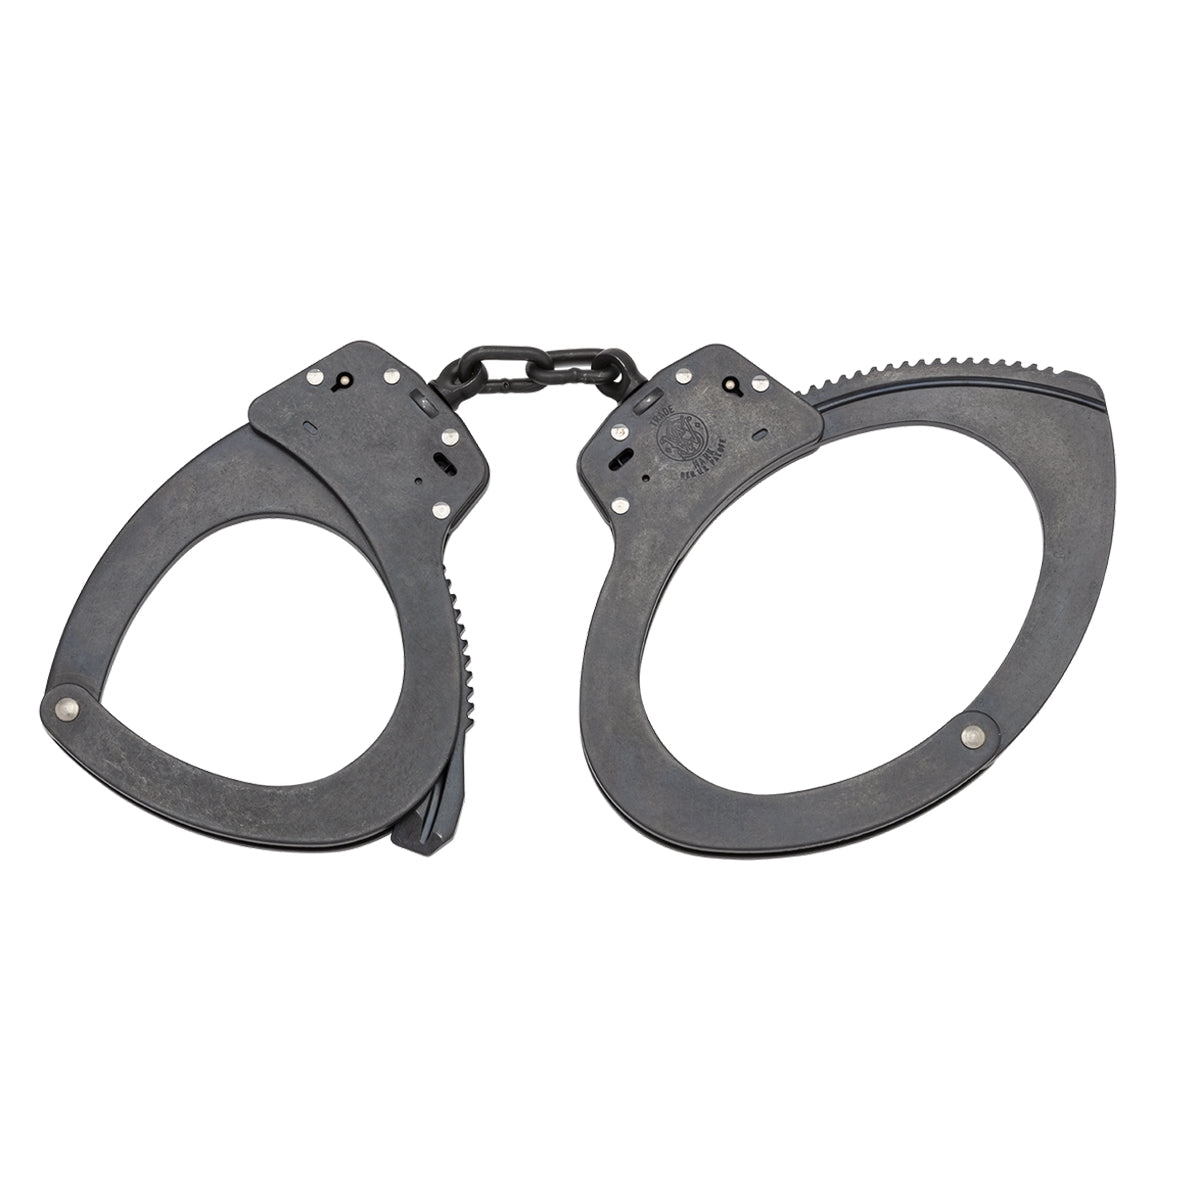 Smith & Wesson Model 110 Special Security Handcuffs